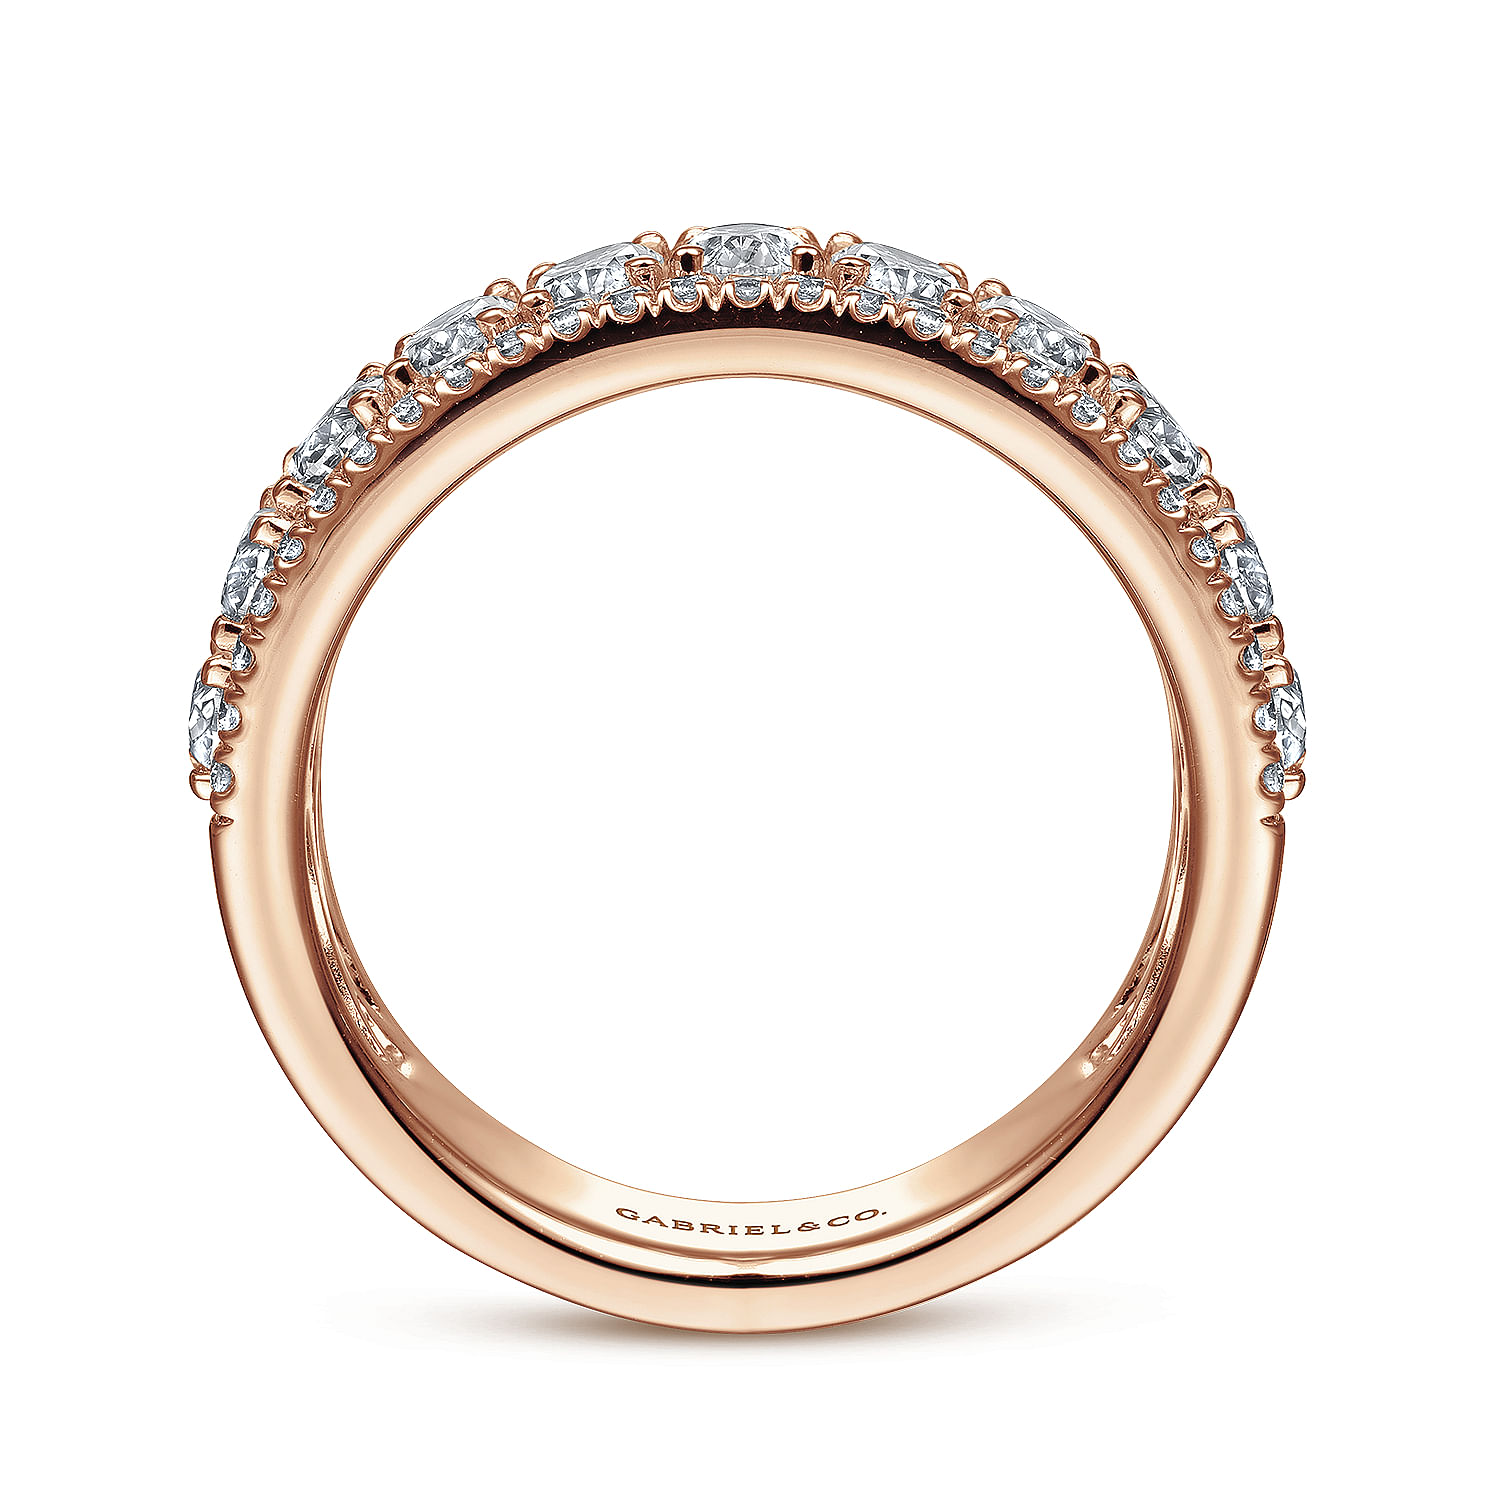 Wide 14K Rose Gold Oval and Round Diamond Anniversary Band